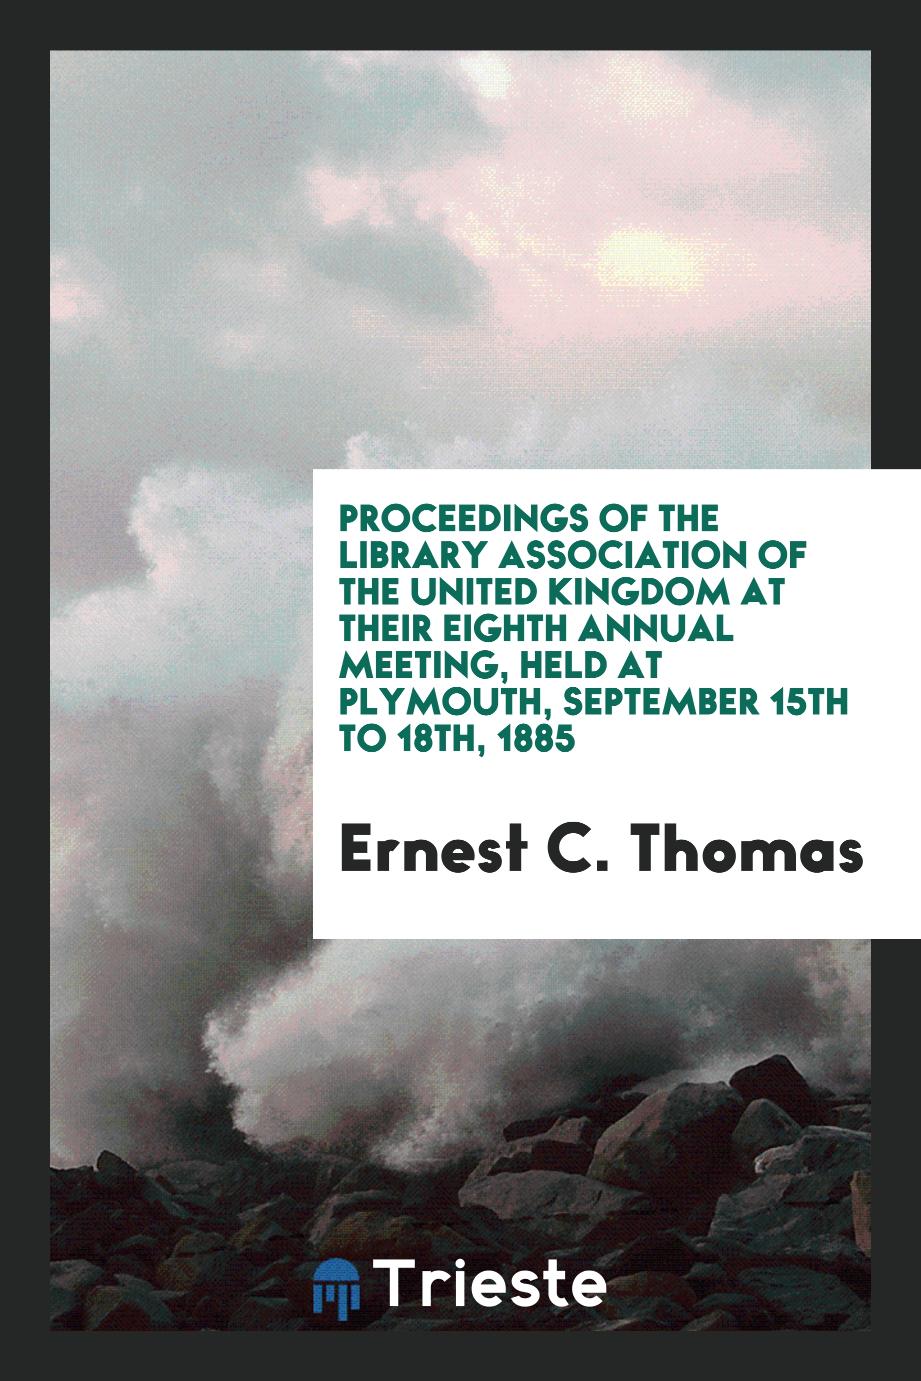 Proceedings of the Library Association of the United Kingdom at their eighth Annual Meeting, held at Plymouth, September 15th to 18th, 1885